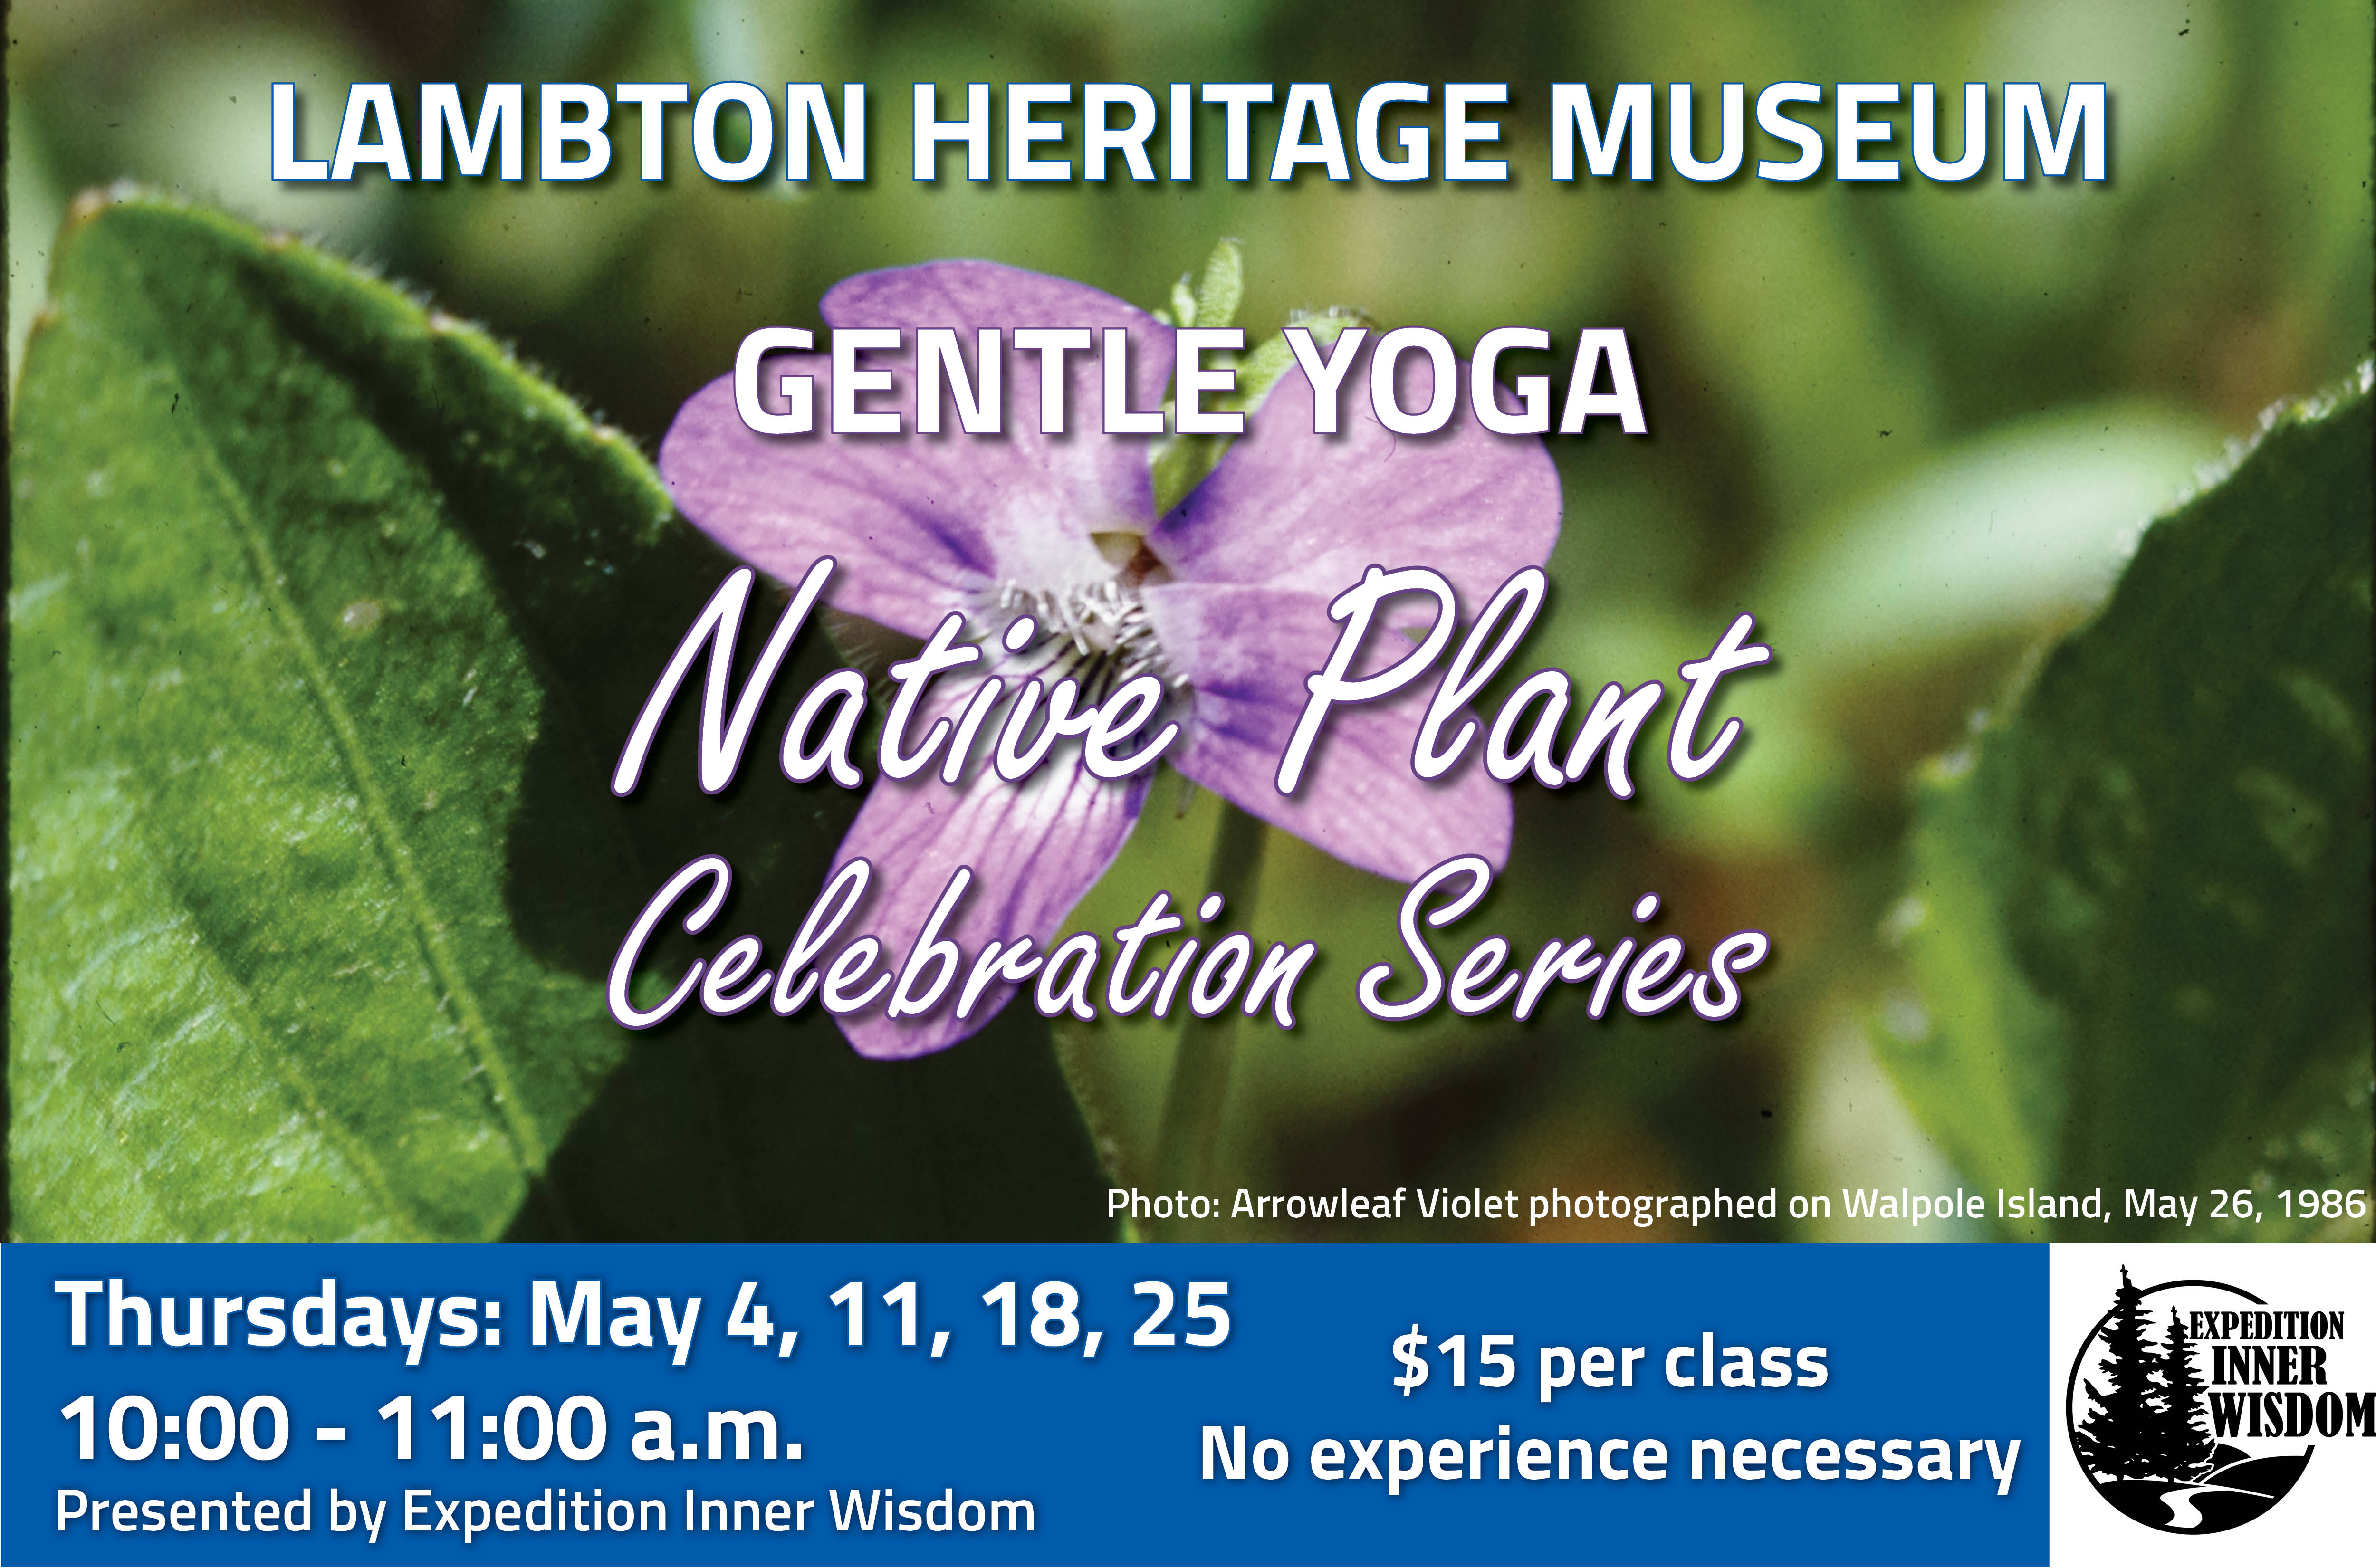 Yoga event details over top of an image of a flower